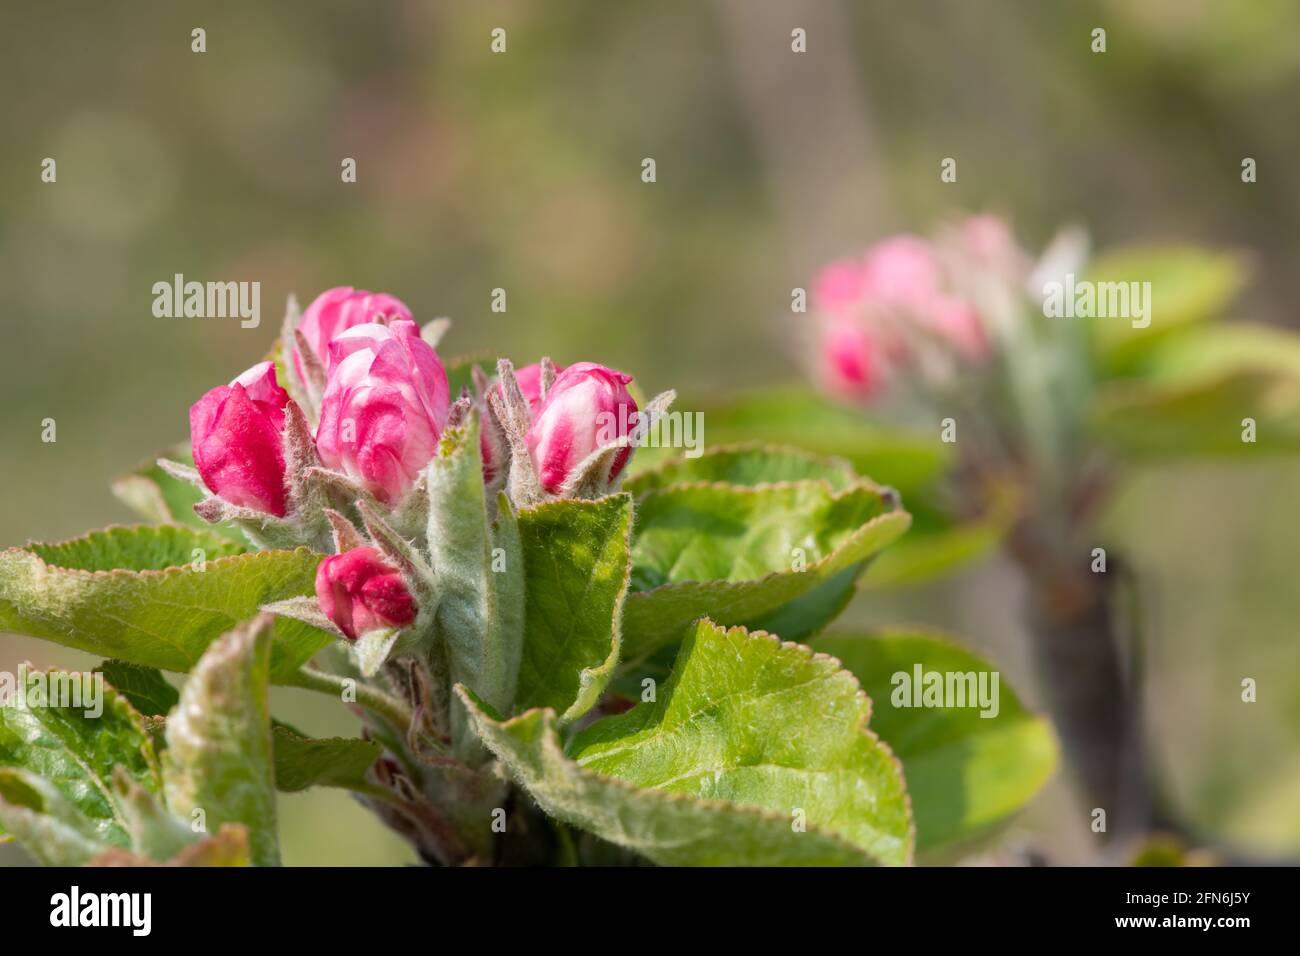 Macro shot of an apple branch at the pink bud growth stage Stock Photo